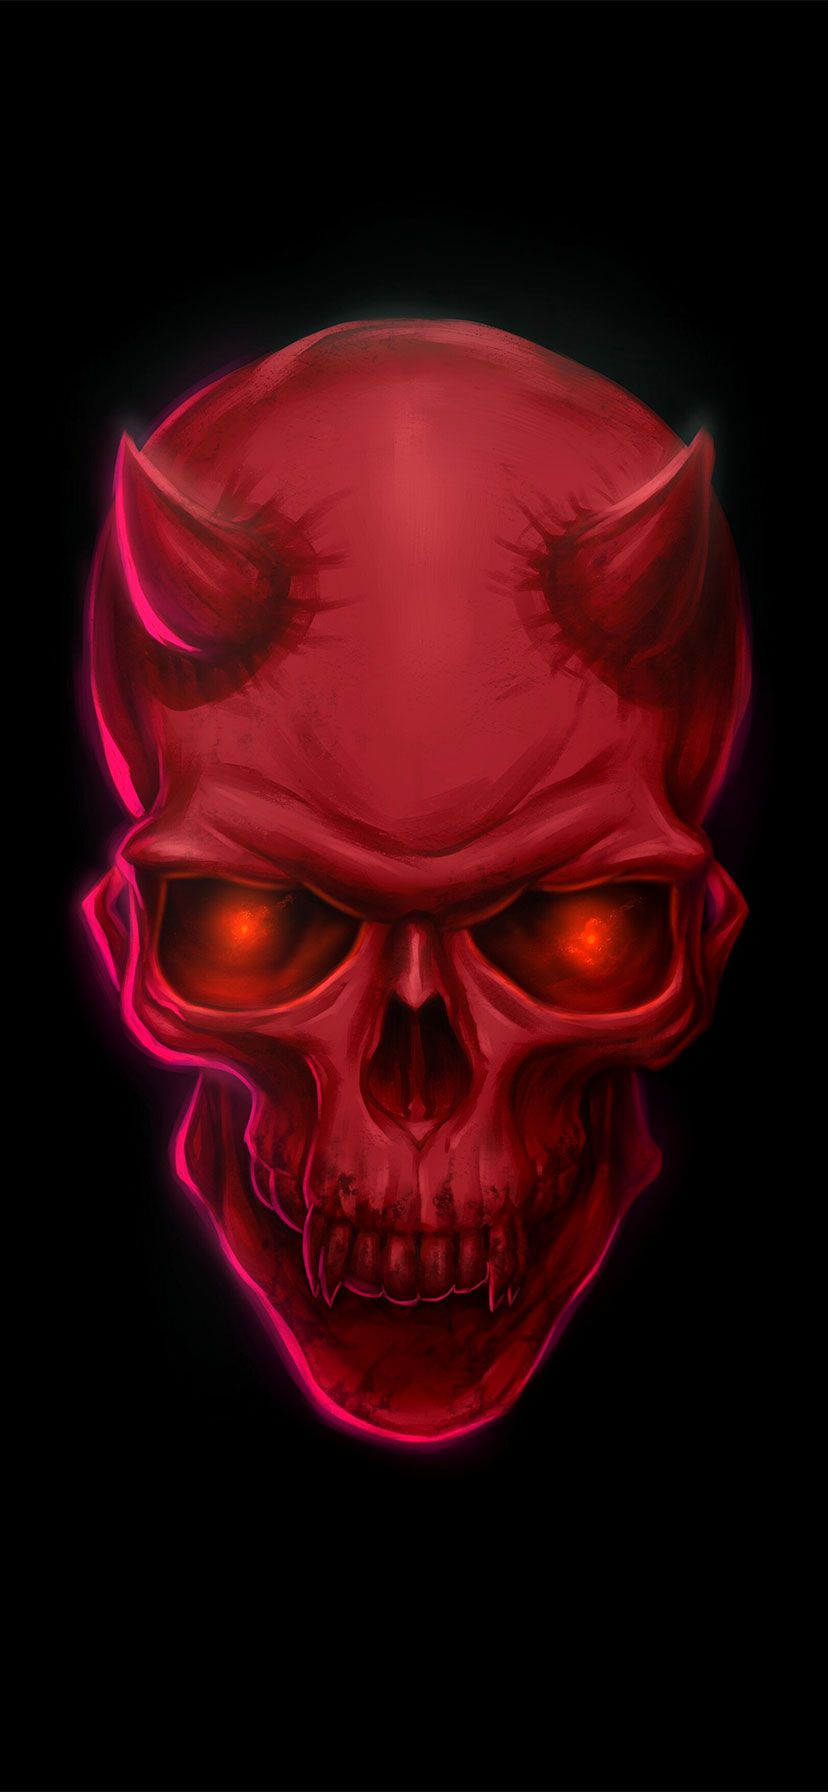 Scary Skulls iPhone Wallpapers on WallpaperDog